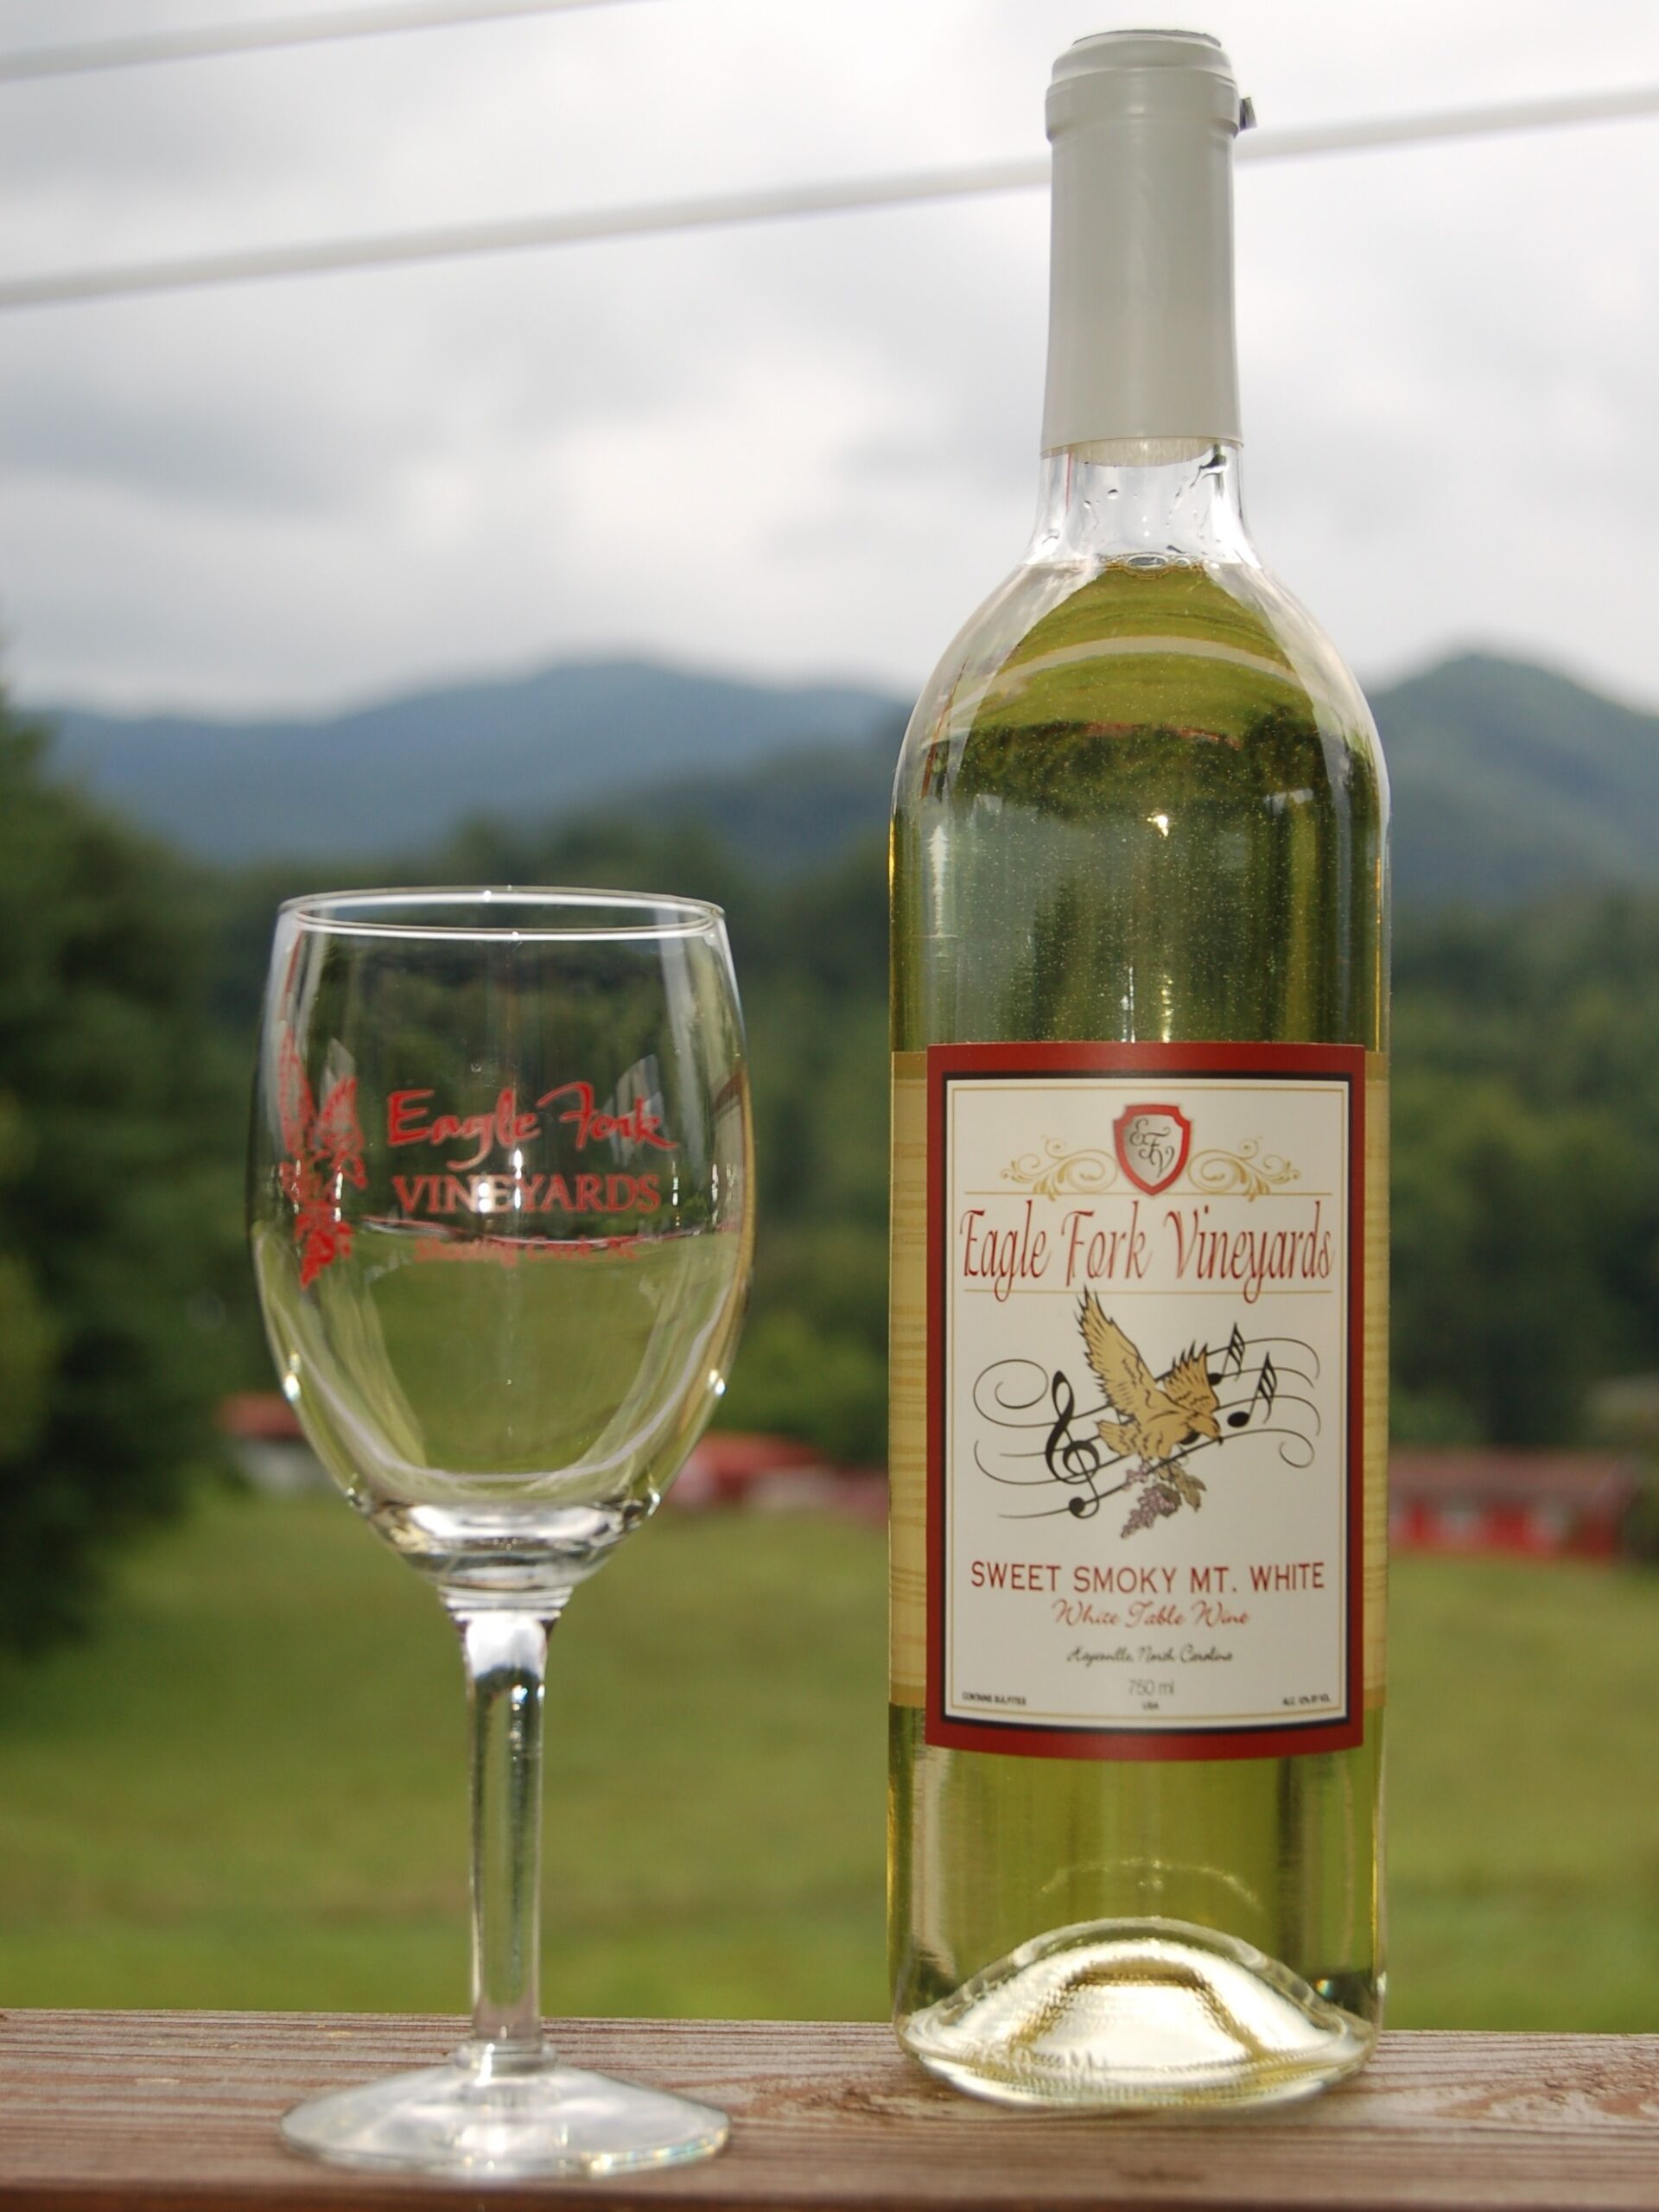 Made from the classic southern white muscadine grape, the delicious sweet wine speaks of large plump white berries just waiting to be enjoyed on a warm summer afternoon